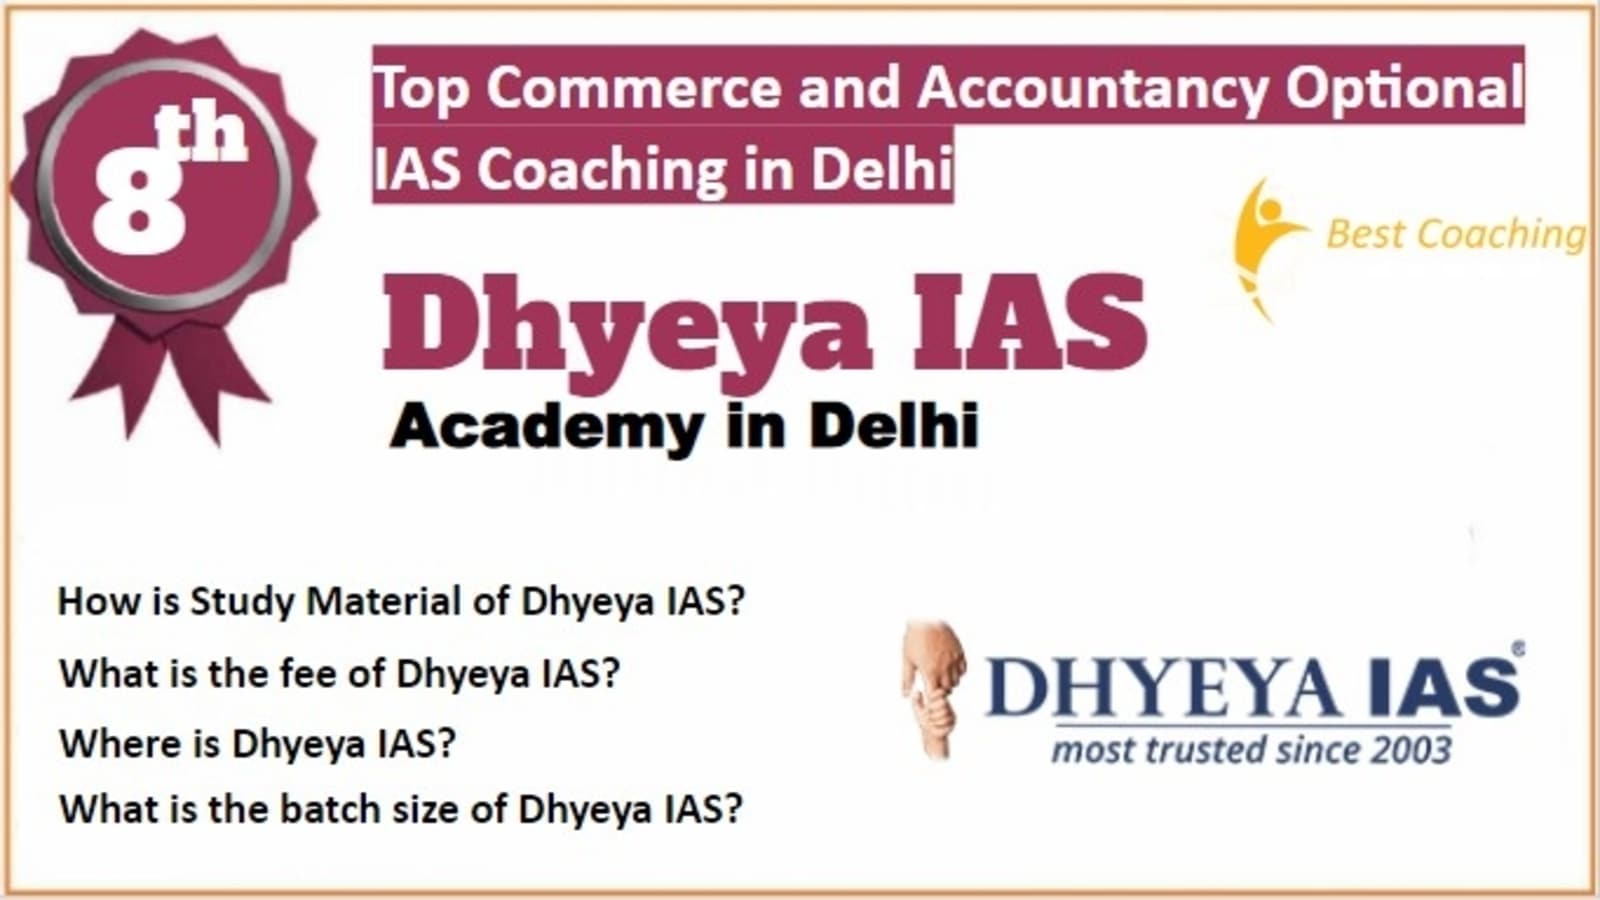 Rank 8 Best Commerce and Accountancy Optional IAS Coaching in Delhi